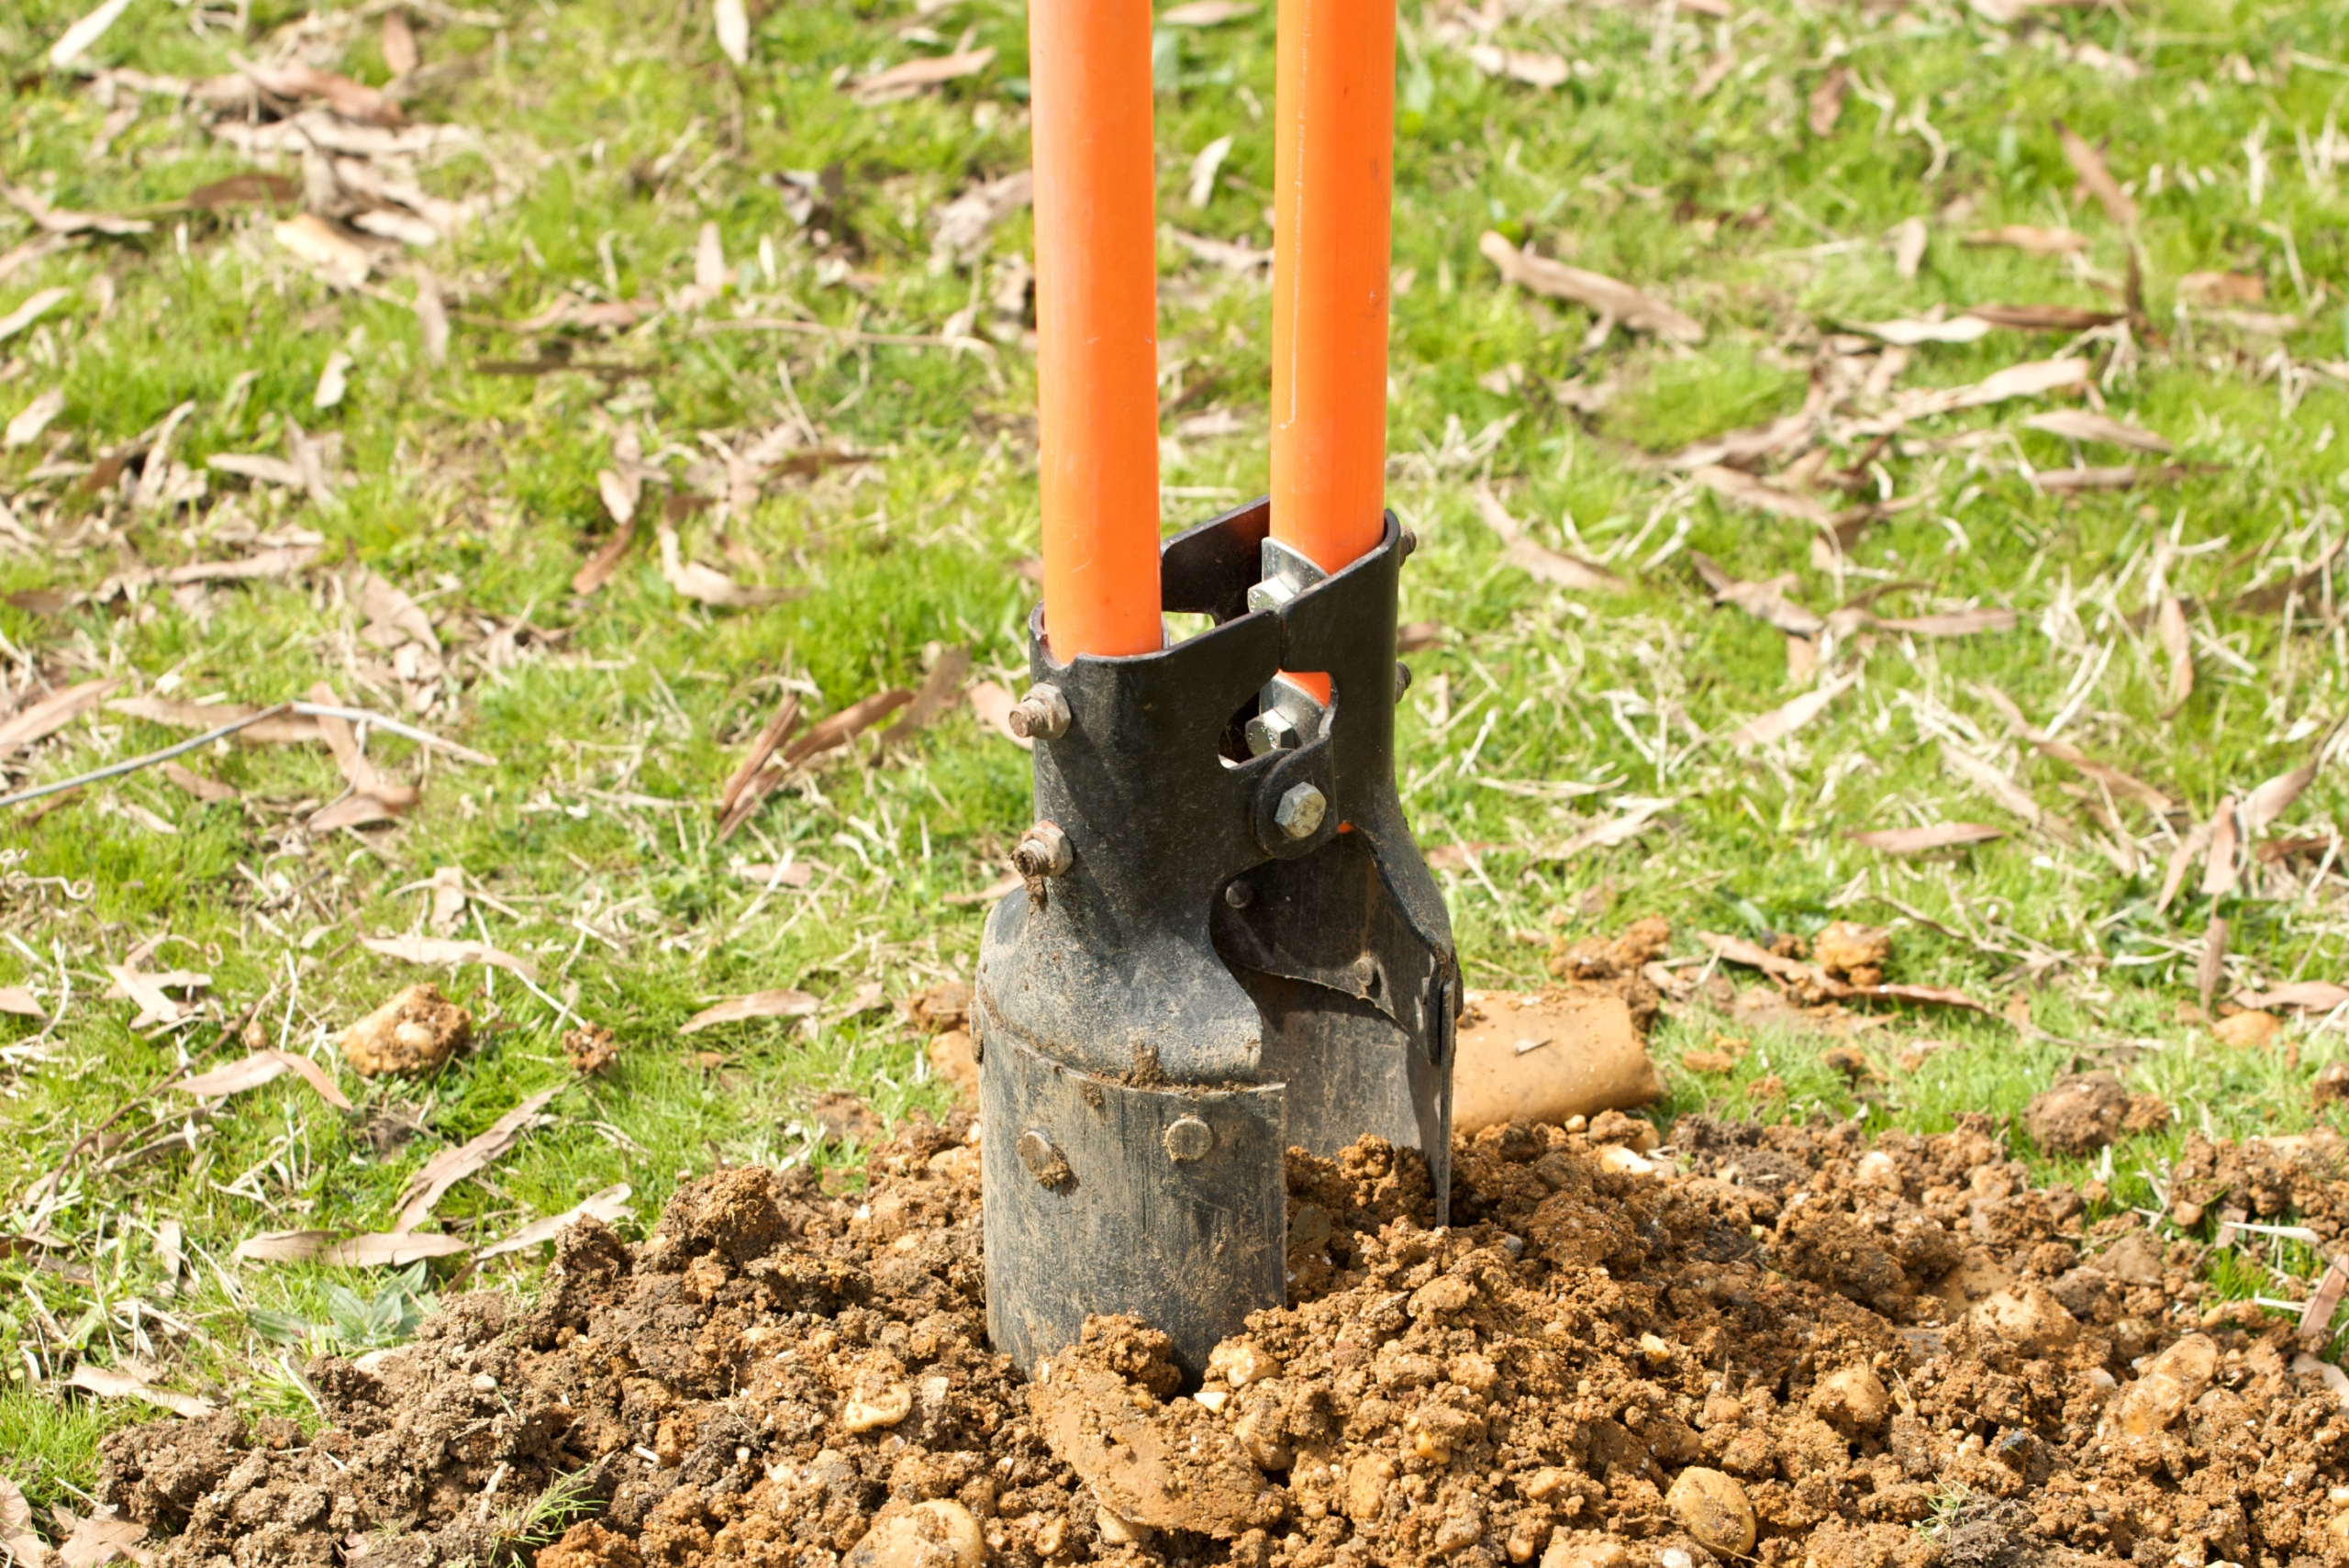 Manual post hole digger with orange handle.